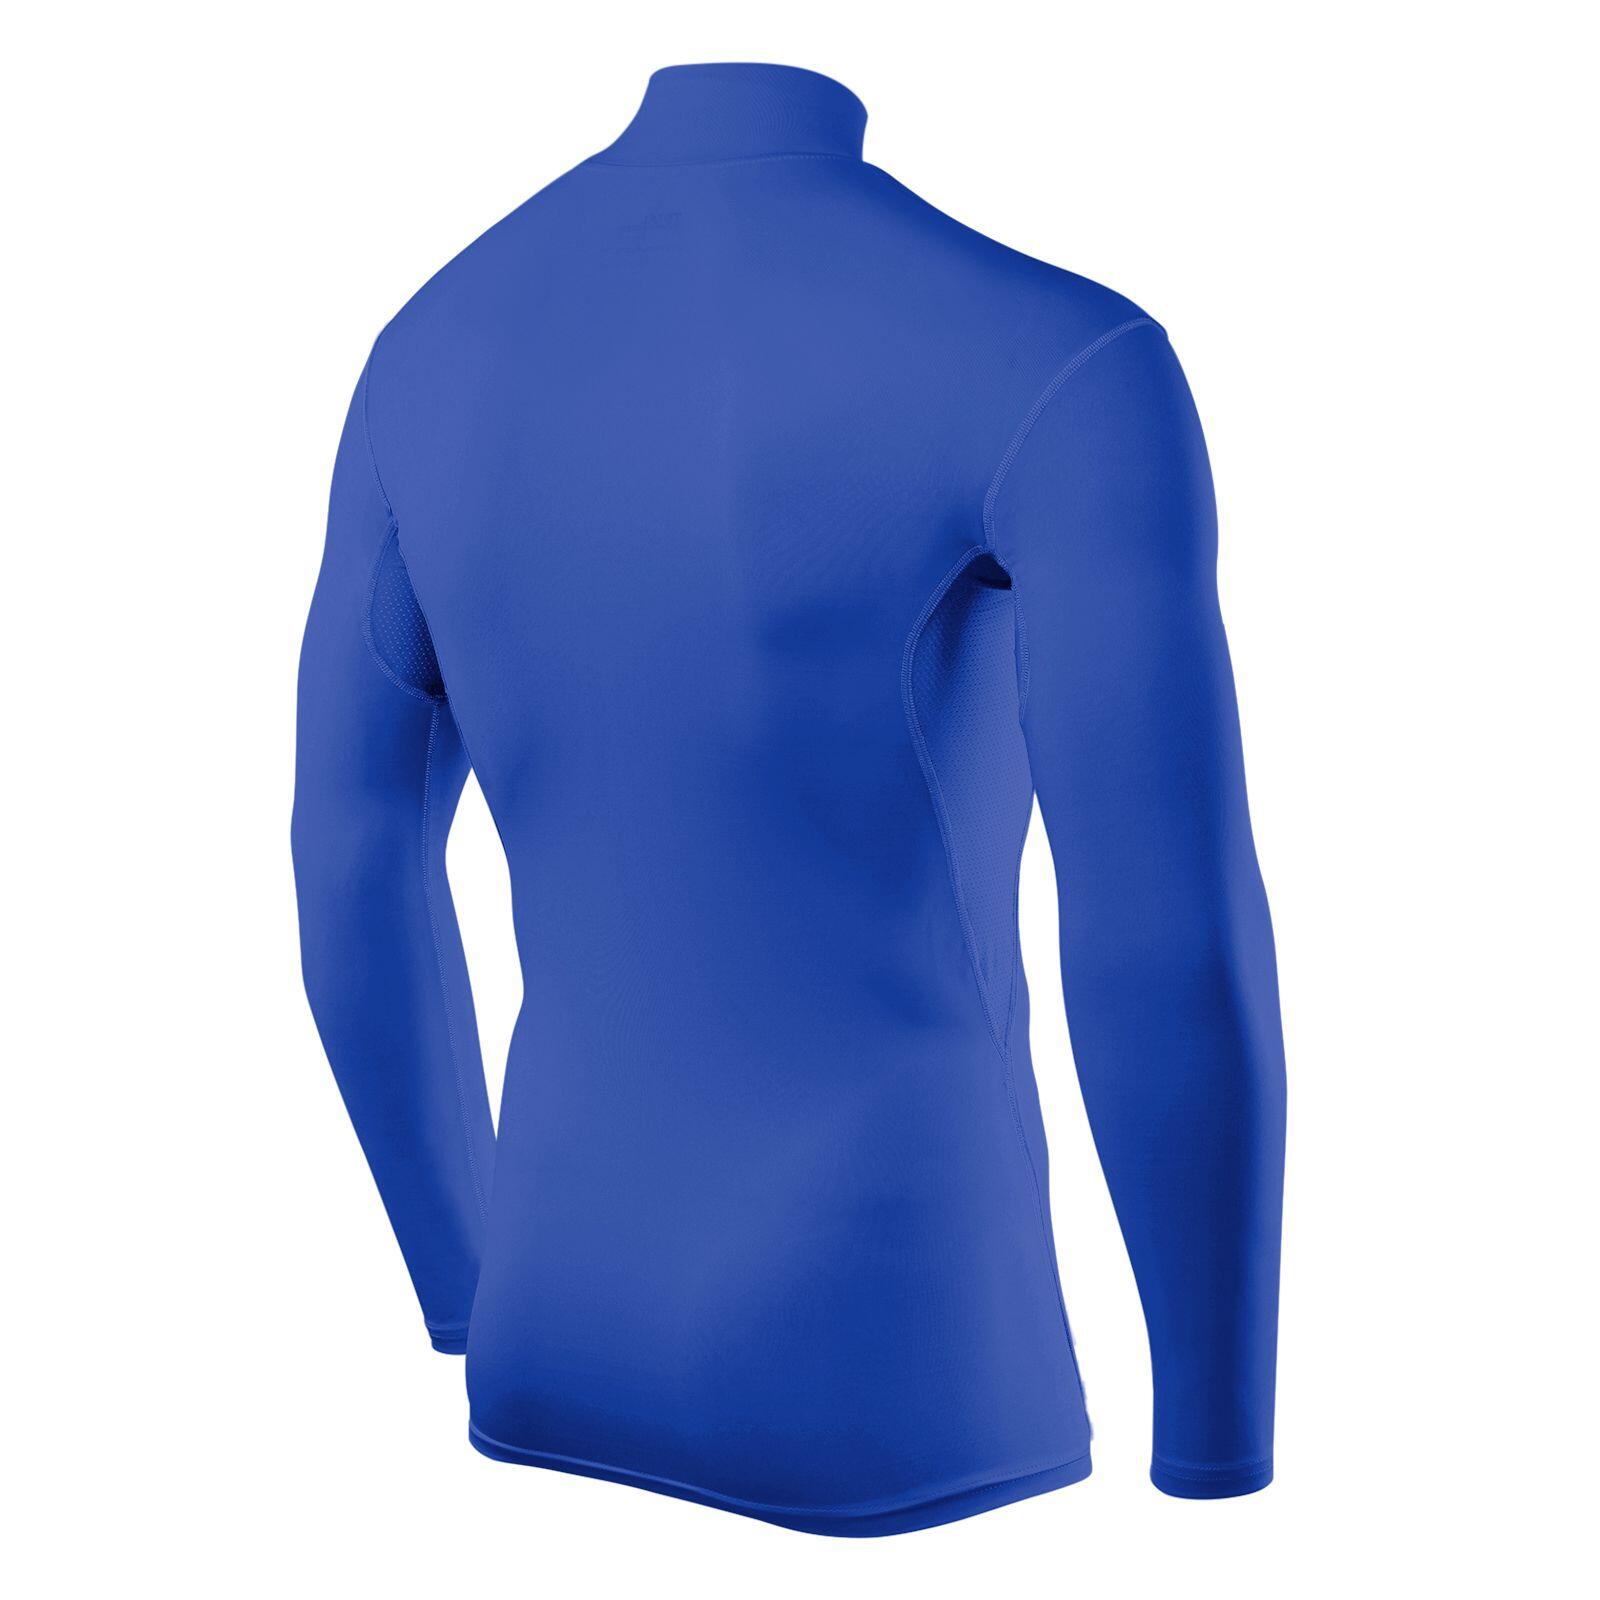 Men's HyperFusion Breathable Base Layer Compression Top - Mock - Dazzling Blue 3/5